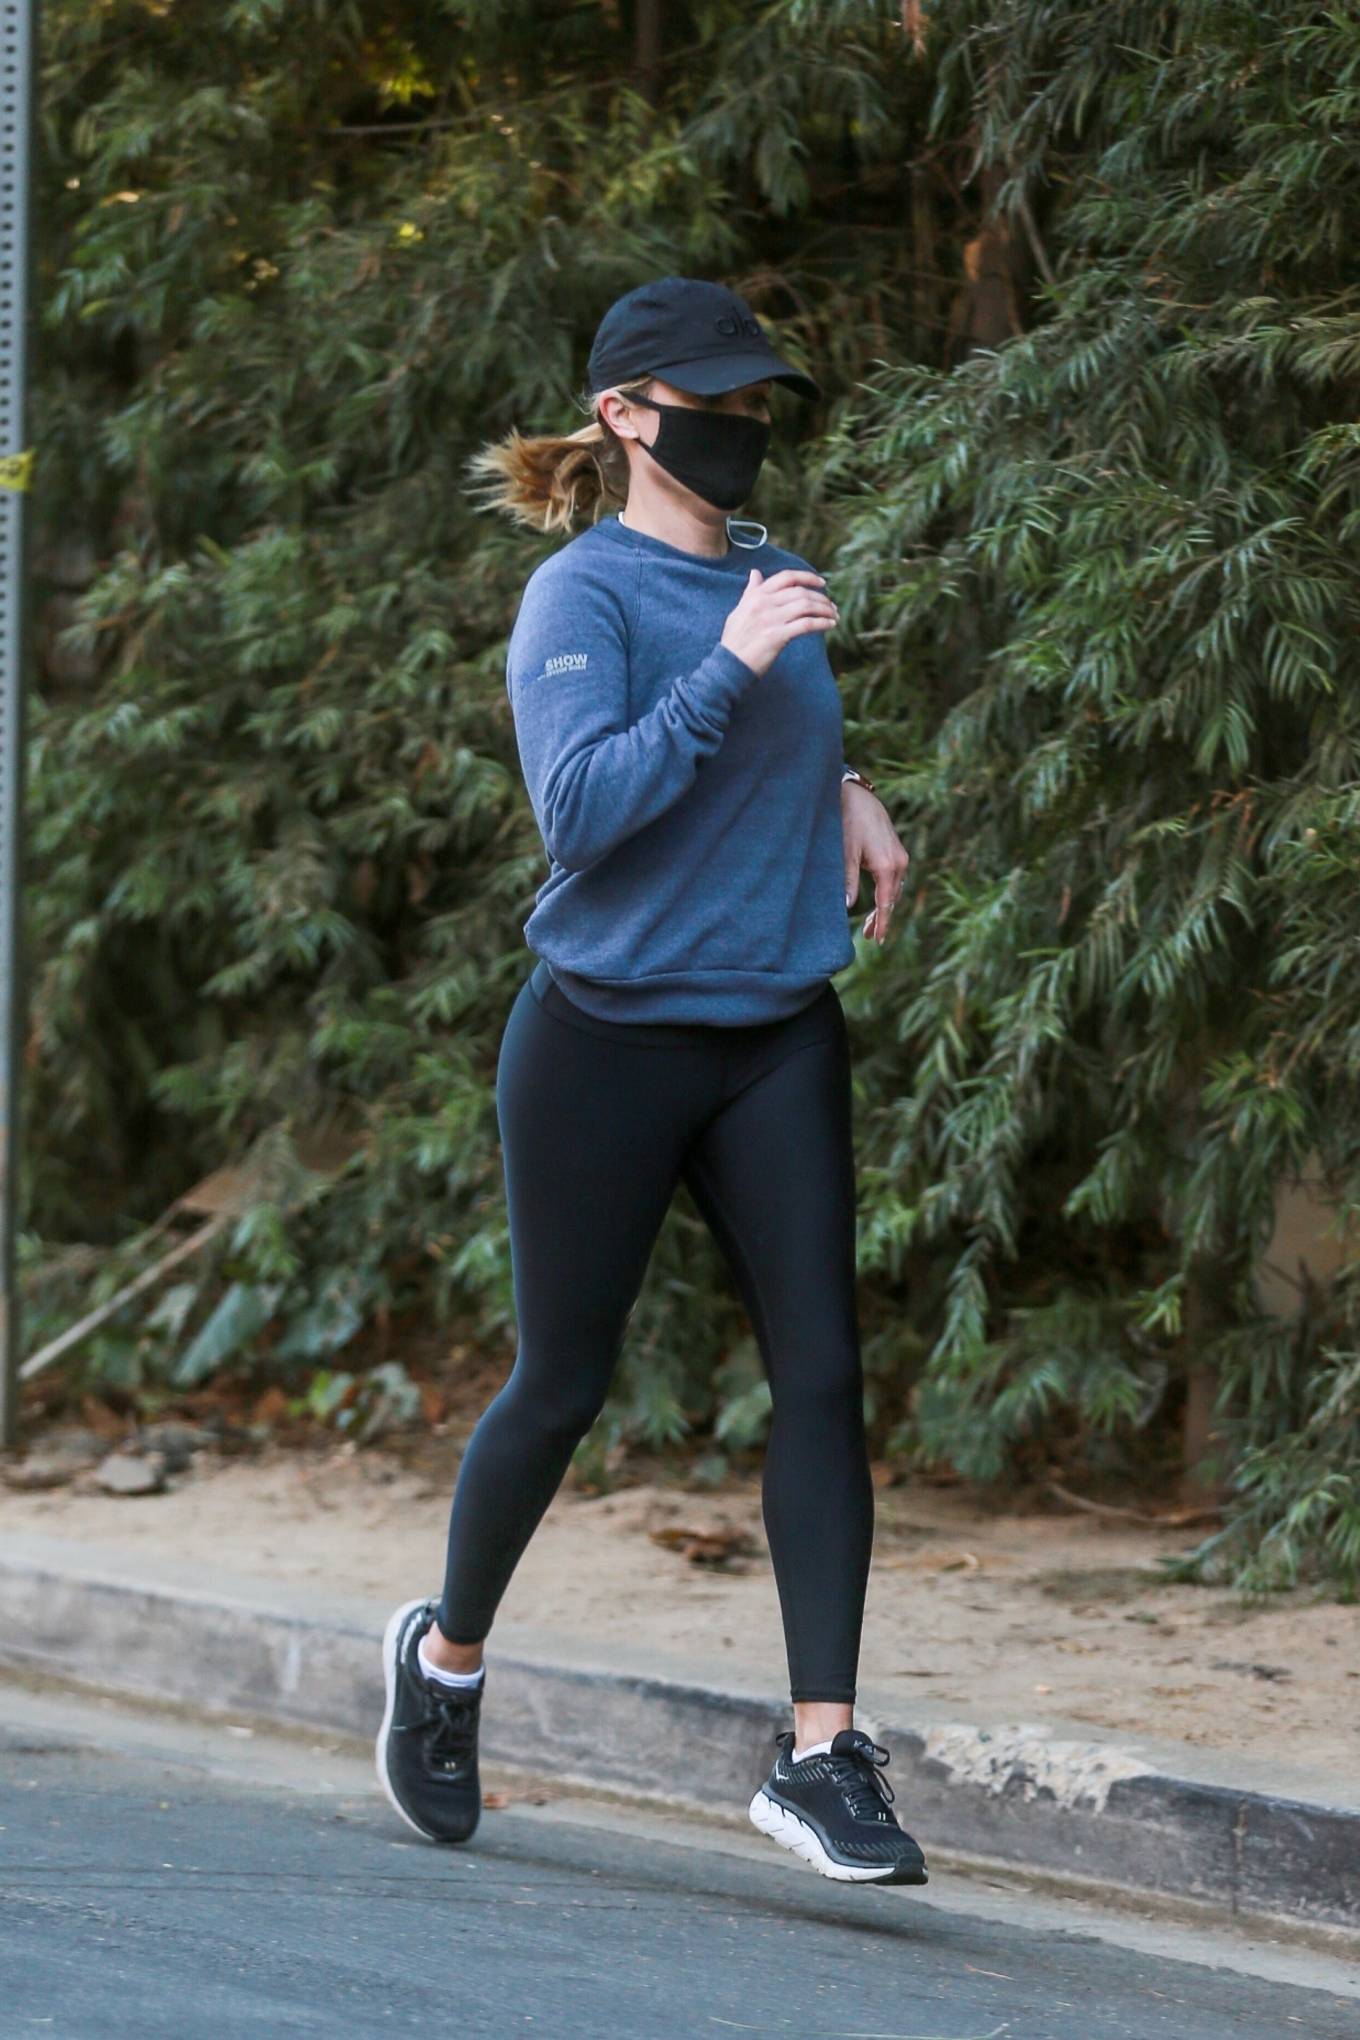 Reese Witherspoon – Morning jog candids in Brentwood